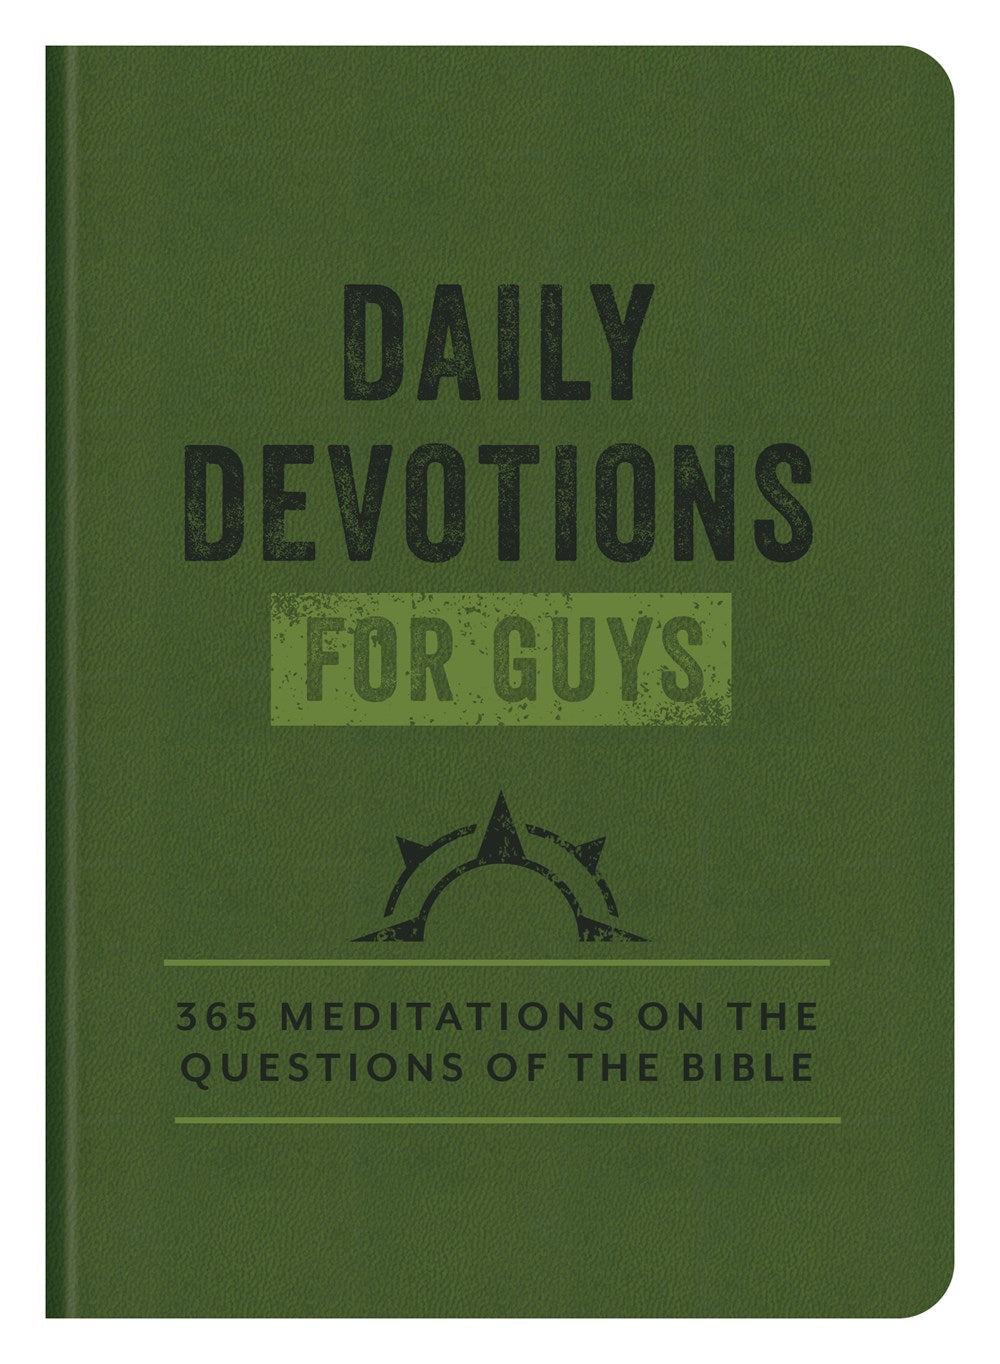 Daily Devotions for Guys - The Christian Gift Company